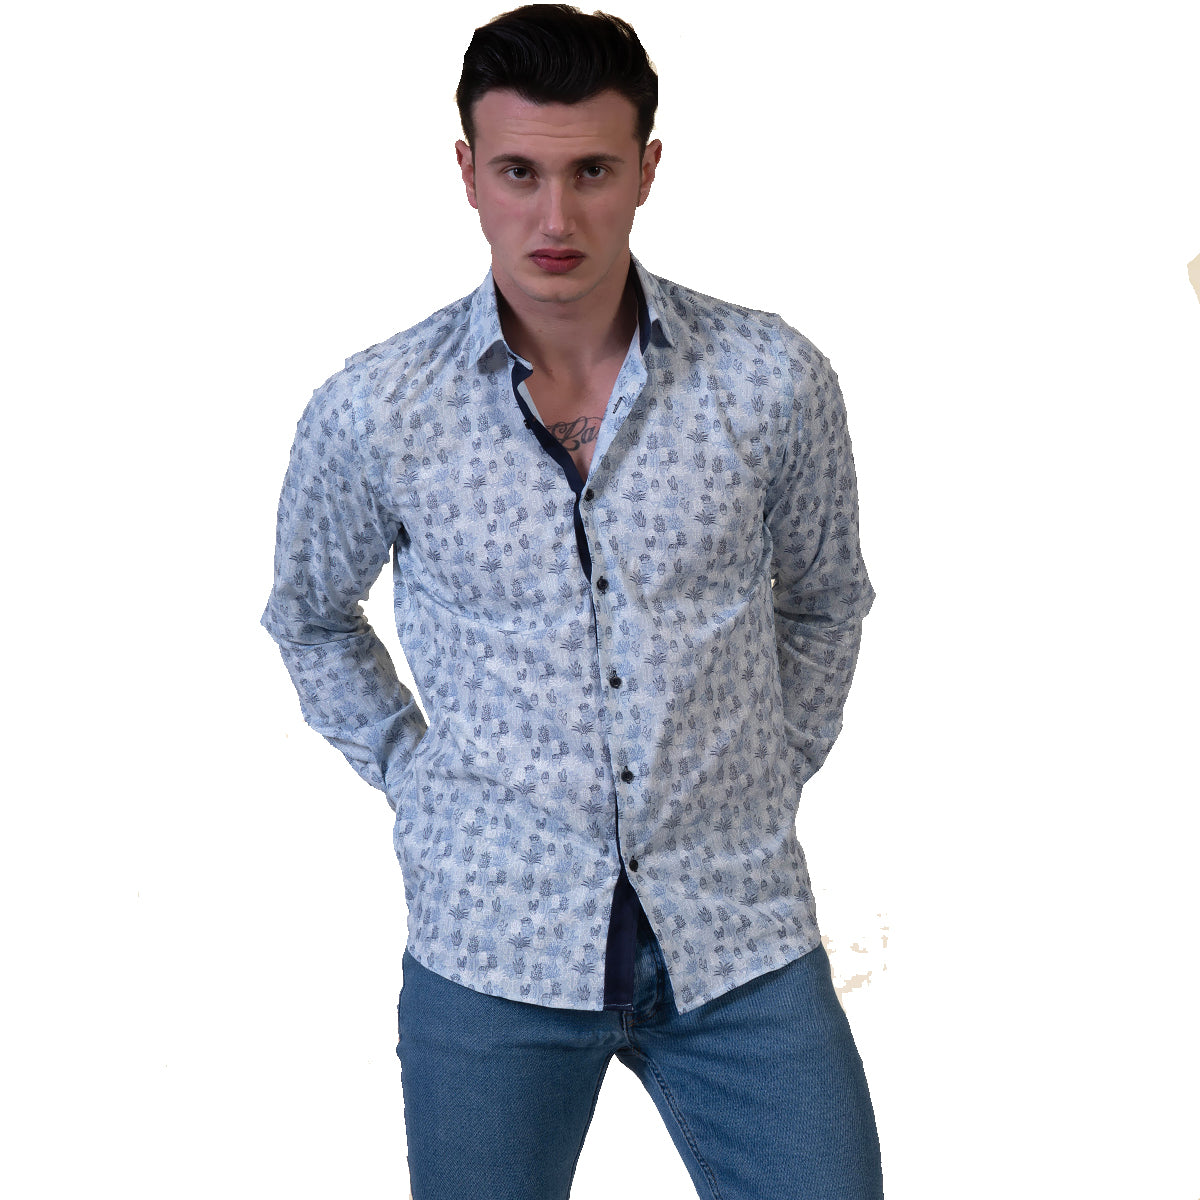 Light Blue Floral Mens Slim Fit Designer Dress Shirt - tailored Cotton Shirts for Work and Casual Wear